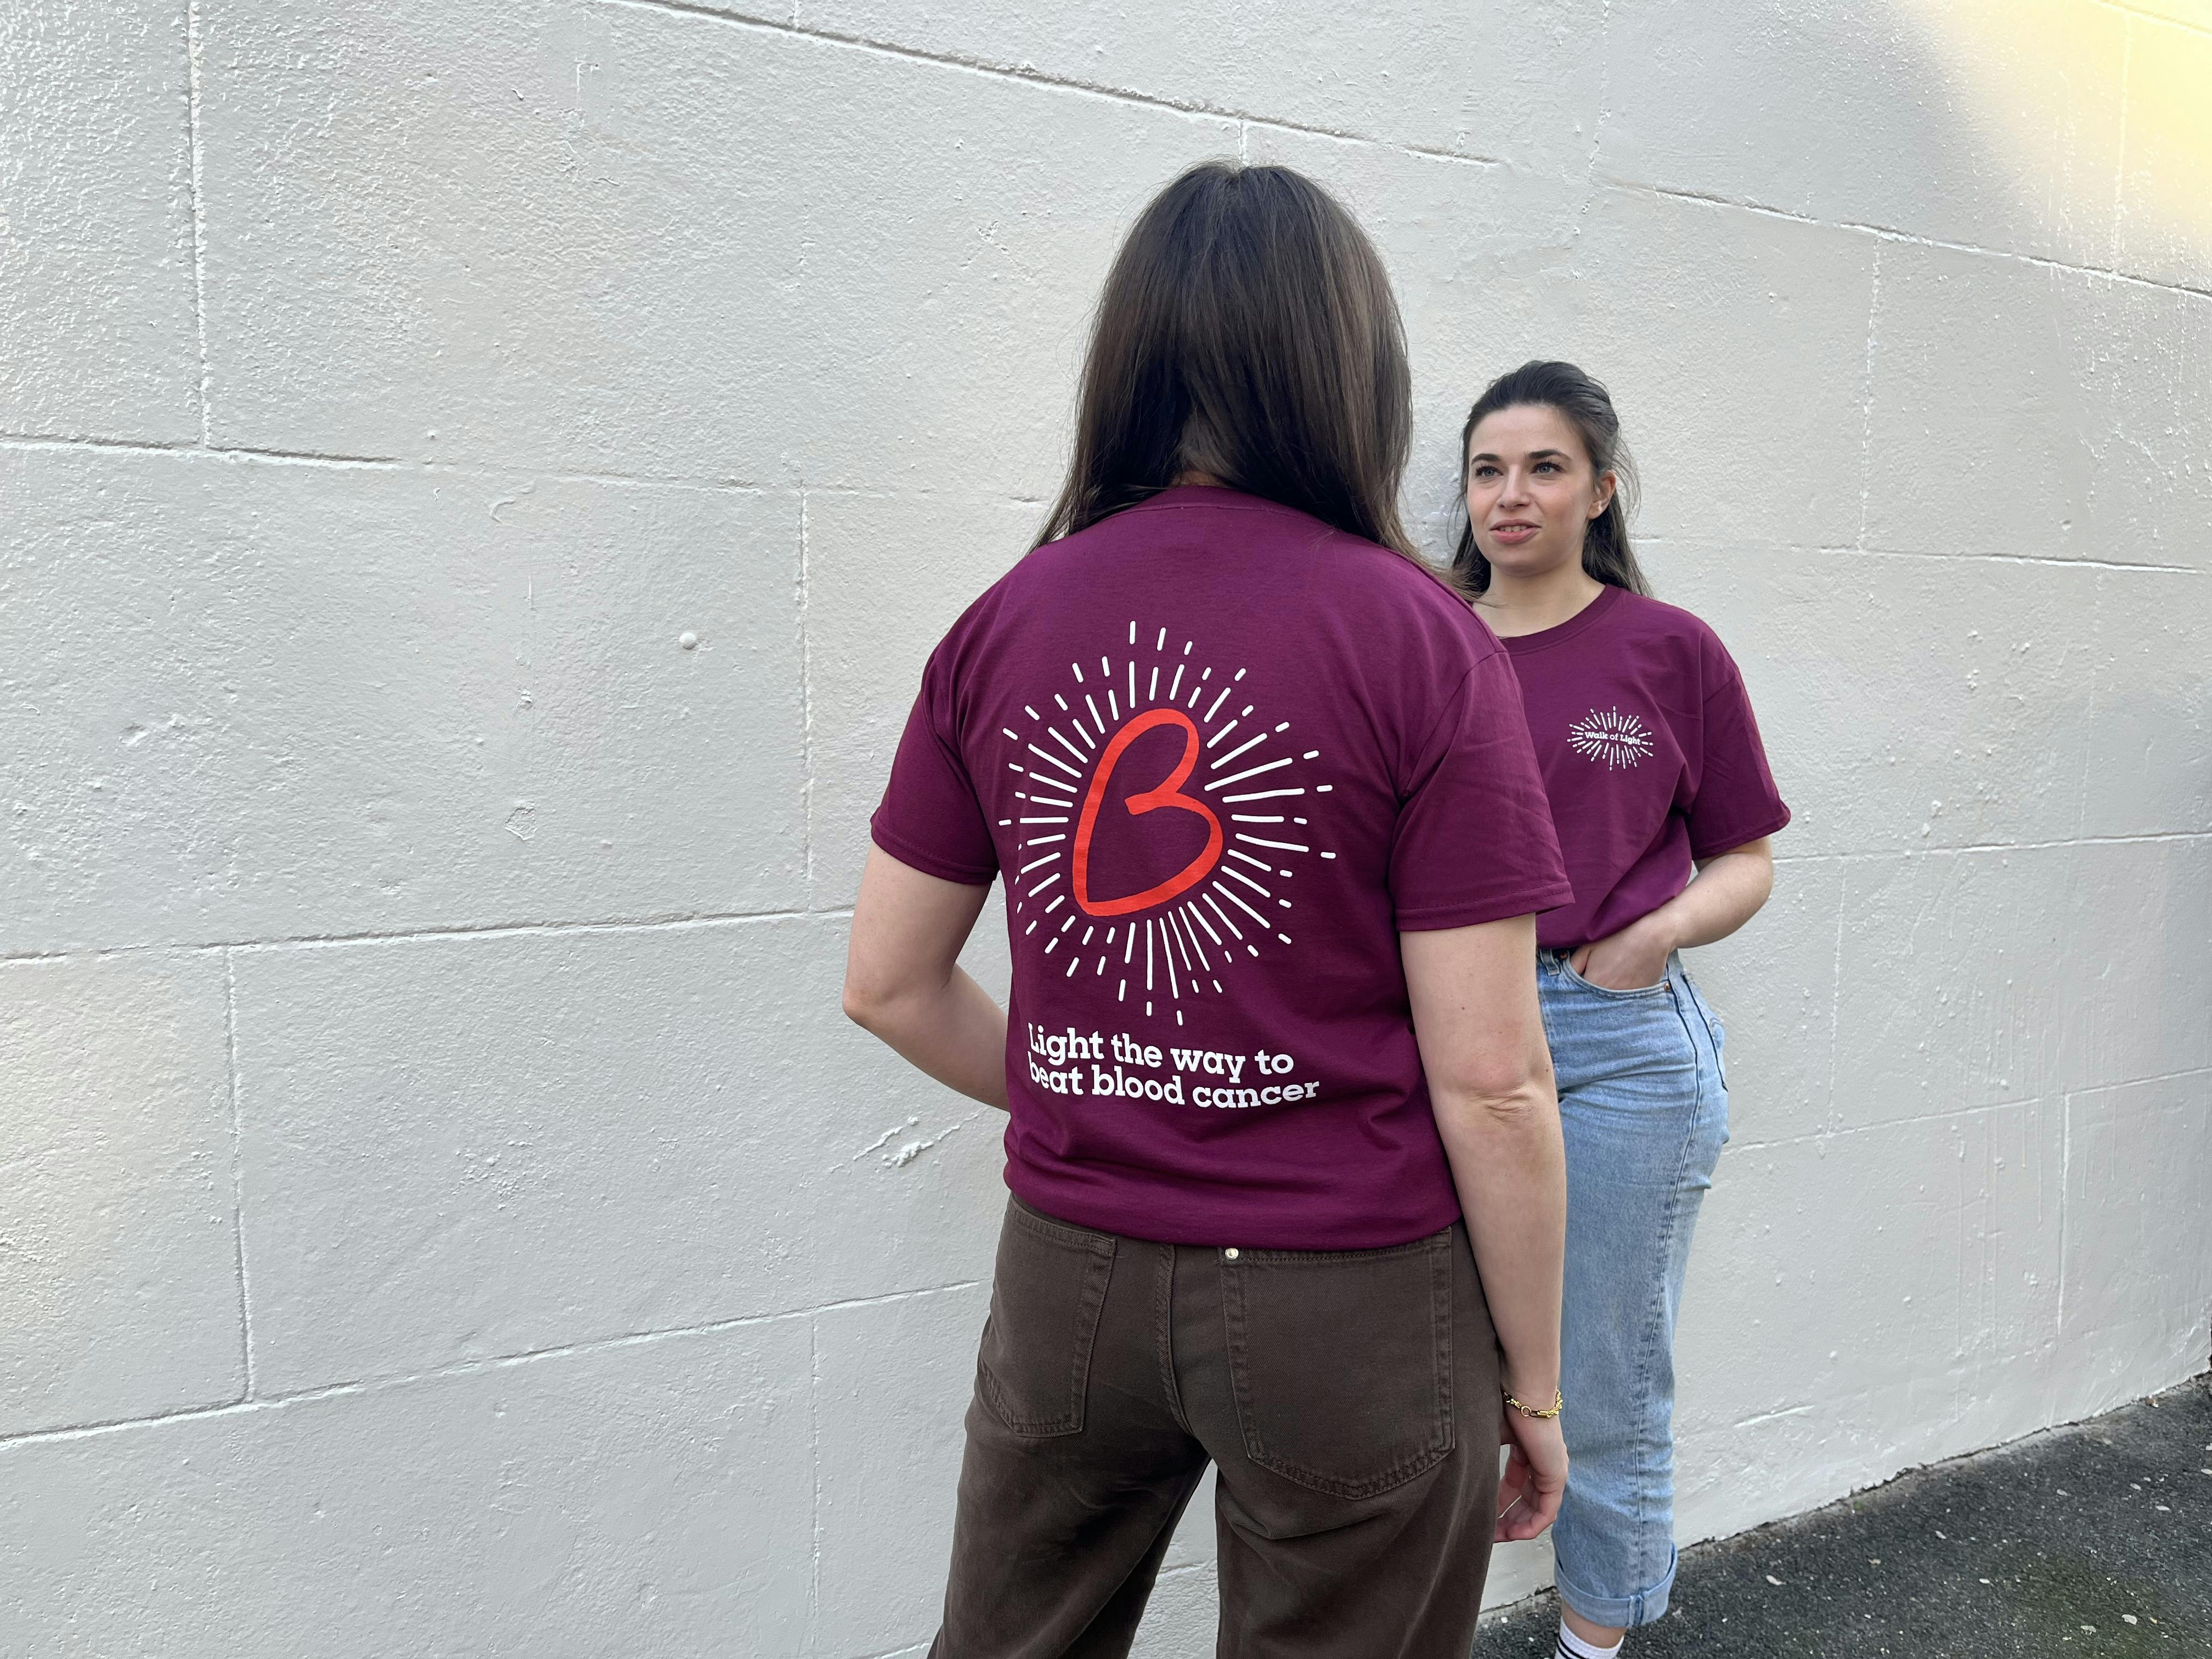 Two people facing each other wearing the Walk of Light t shirt. The back of the shirt has a large red B heart with white lines coming off it